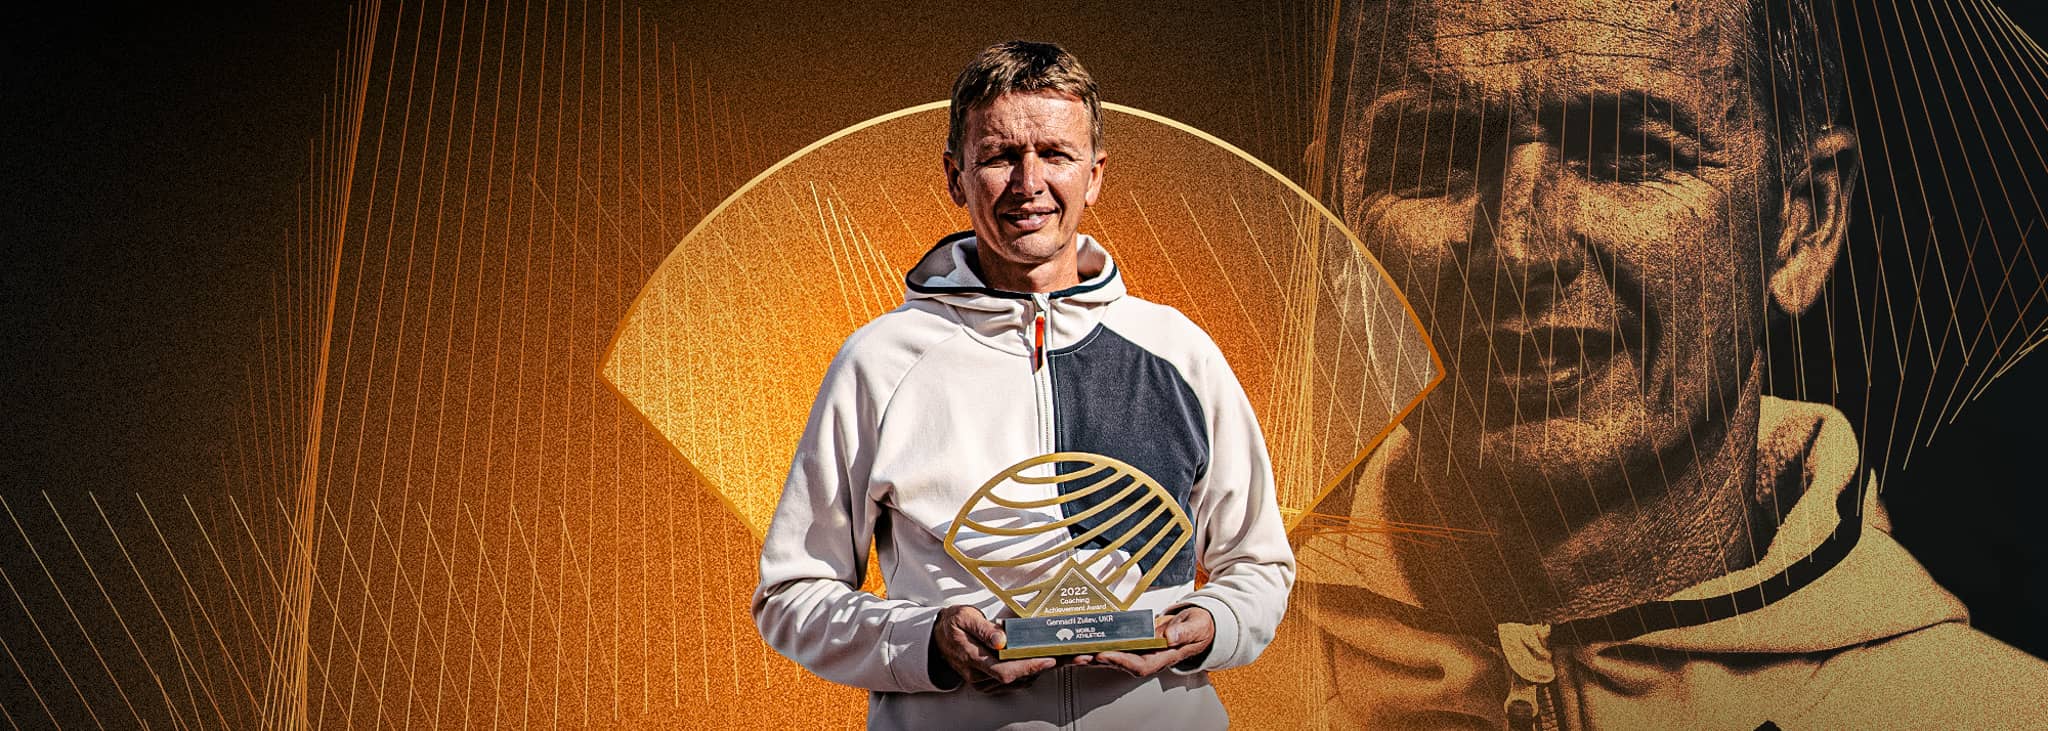 Gennadii zuiev has been named as the recipient of the coaching achievement world athletics award 2022